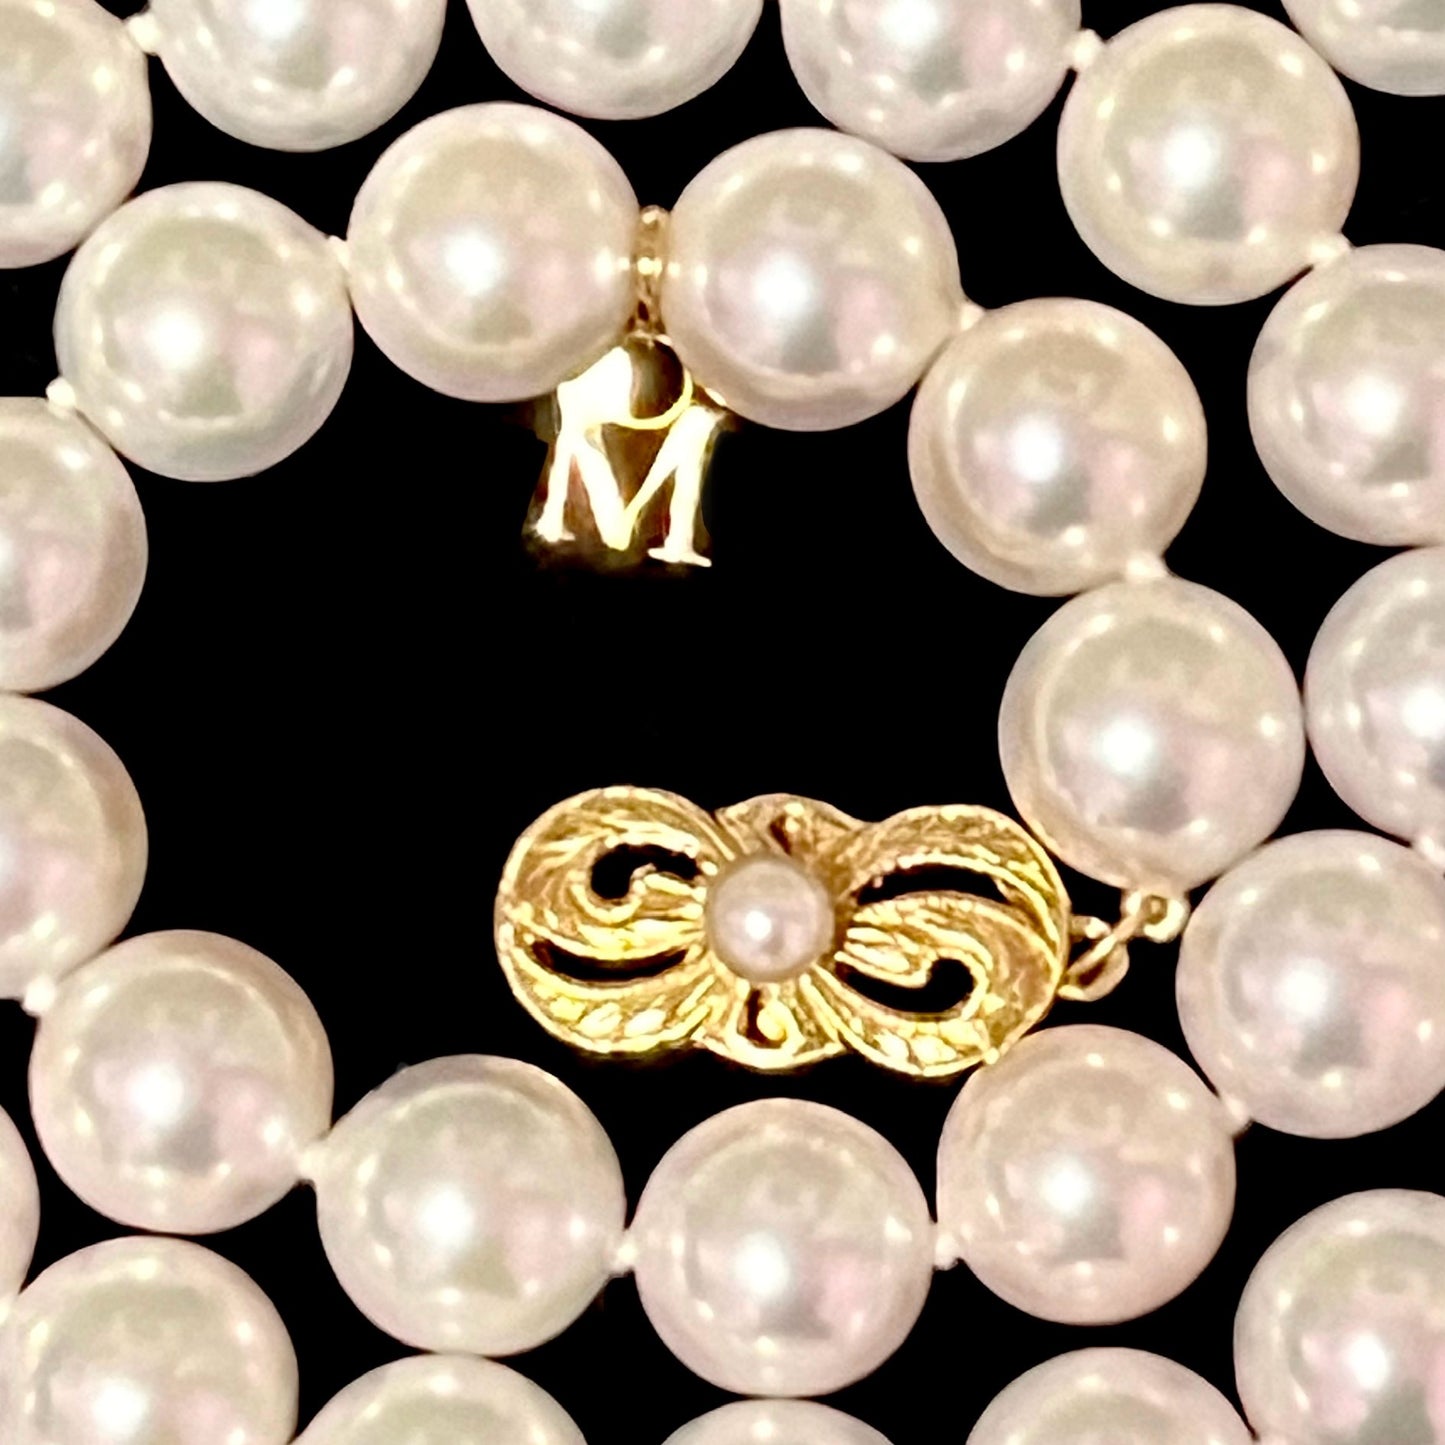 Mikimoto Estate Akoya Pearl Necklace 17" 18k Y Gold 8.5 mm Certified $10,750 311591